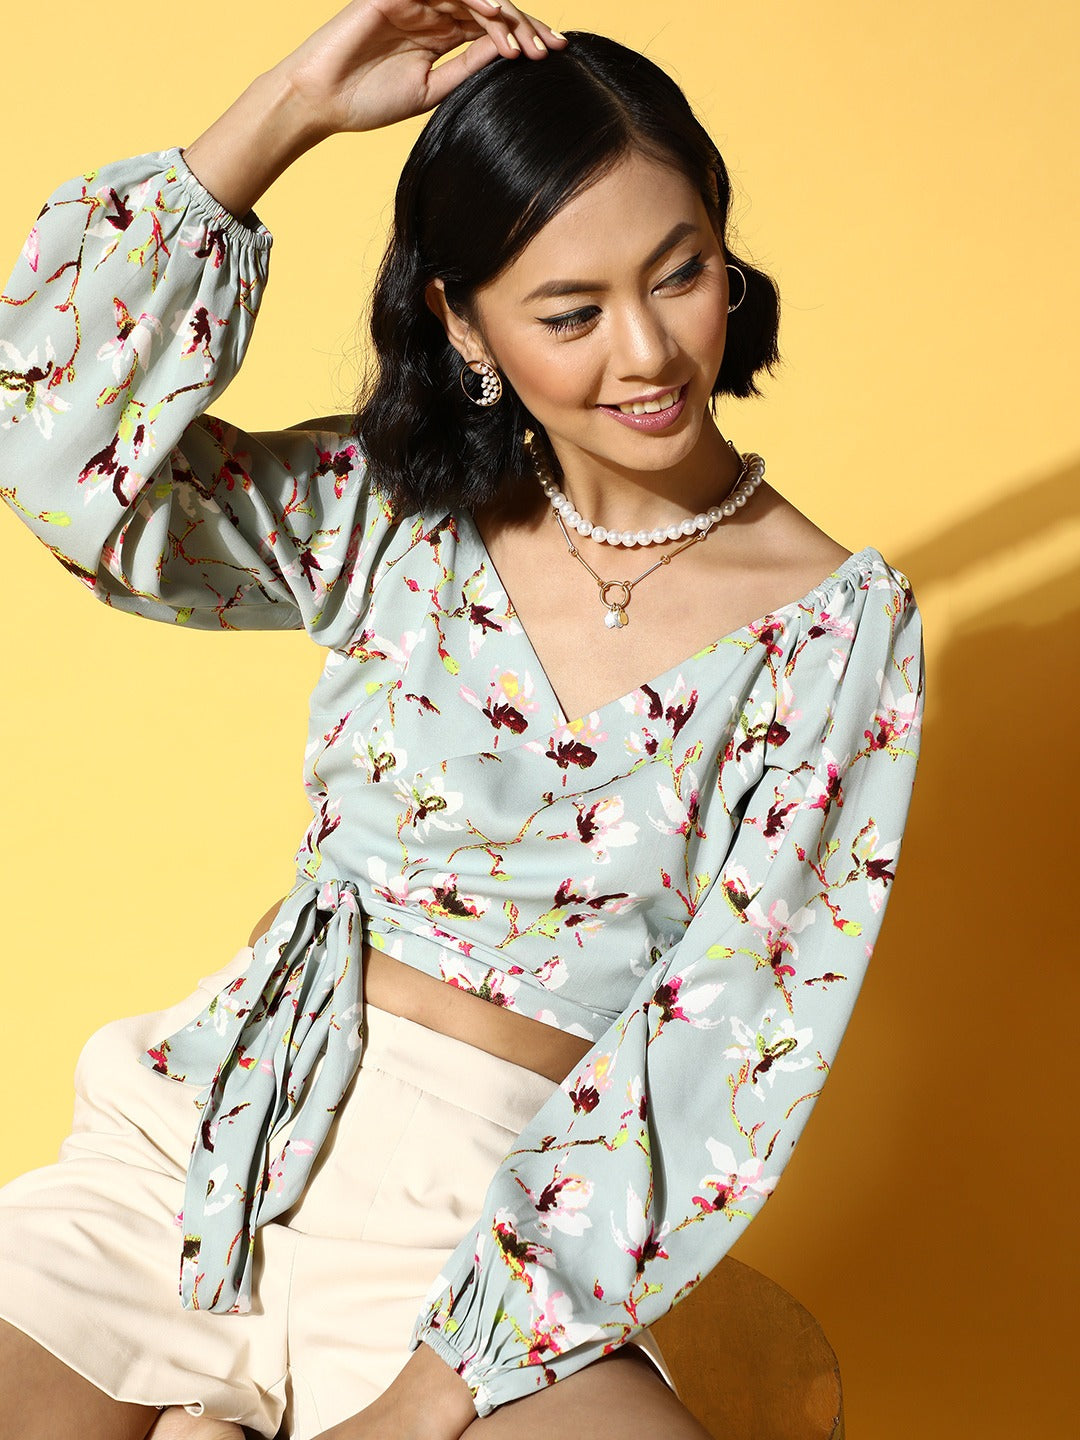 How To Wear A Floral Crop Top? – solowomen